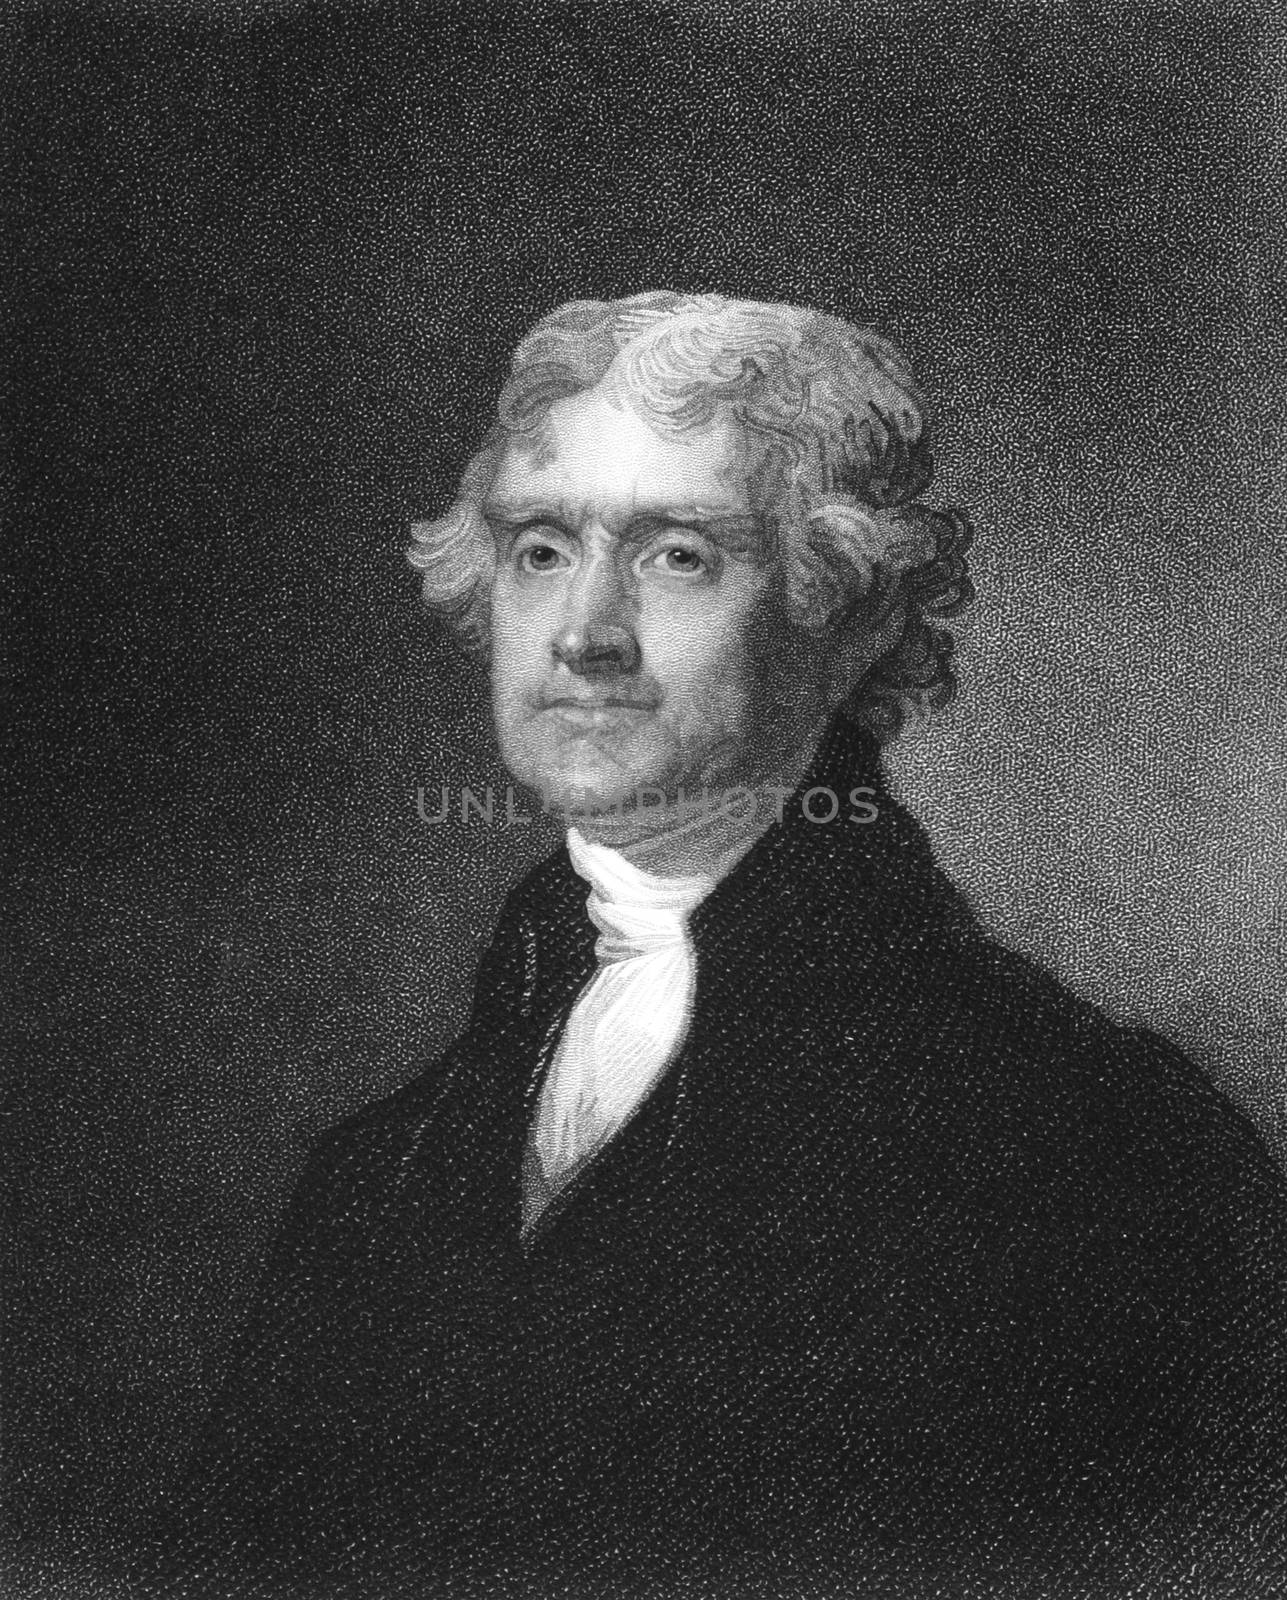 Thomas Jefferson (1743-1826) on engraving from 1835. American Founding Father, the principal author of the Declaration of Independence and third President during 1801-1809. Engraved by J.B.Forrest and published in ''National Portrait Gallery of Distinguished Americans Volume II'',USA,1835.